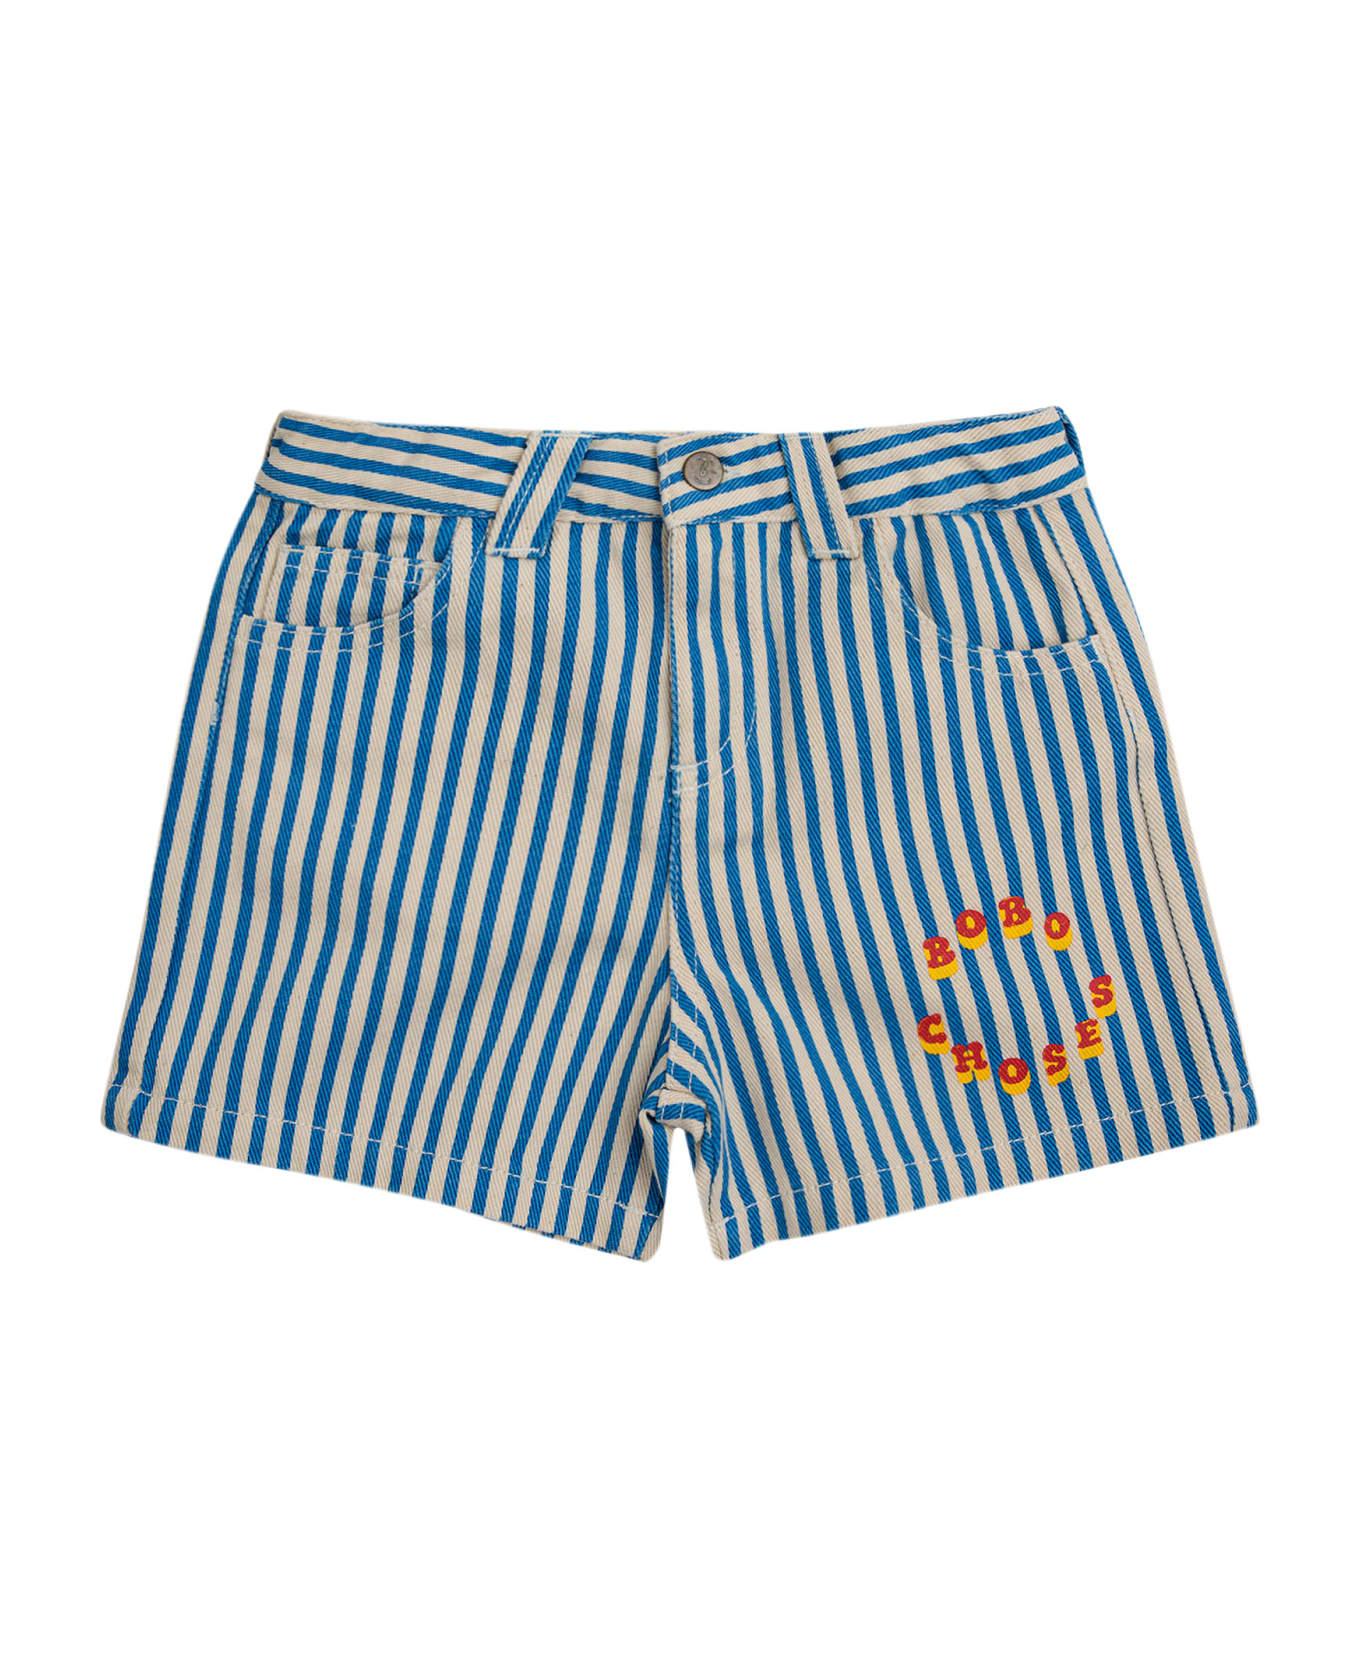 Bobo Choses Striped Shorts With Logo For Kids - Blue ボトムス